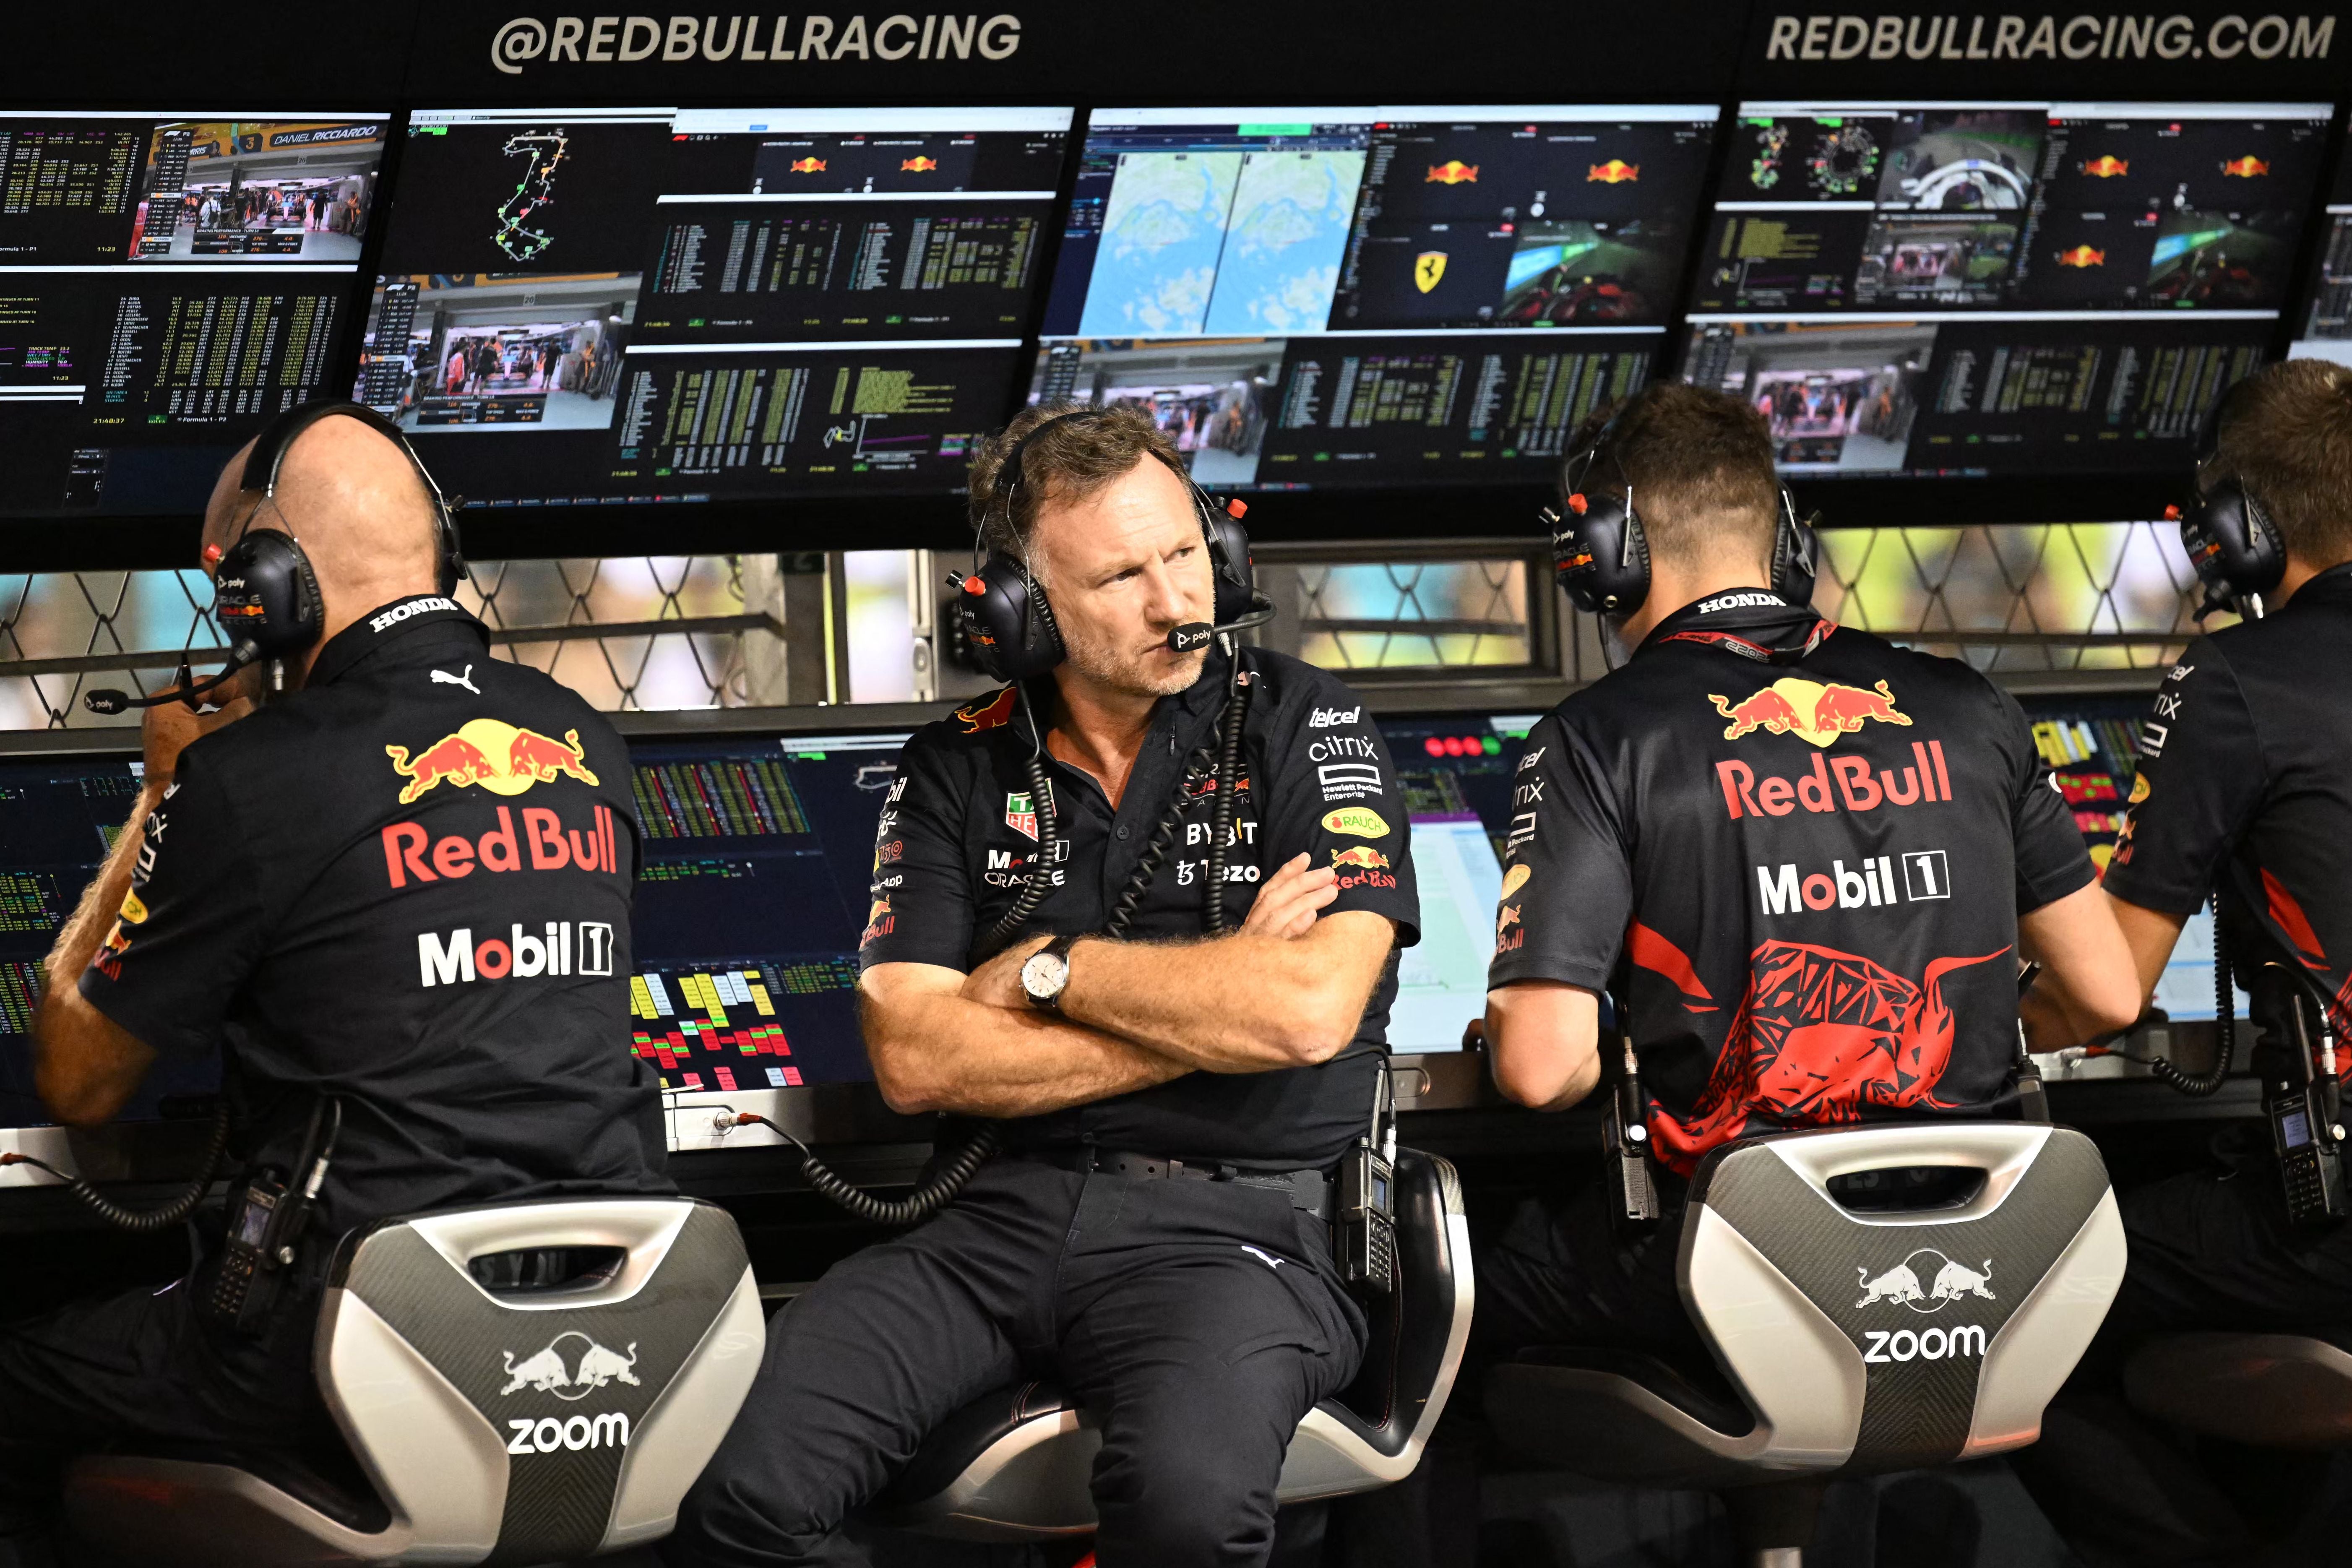 Red Bull are one of the teams said to have overspent, although team principal Christian Horner denies this